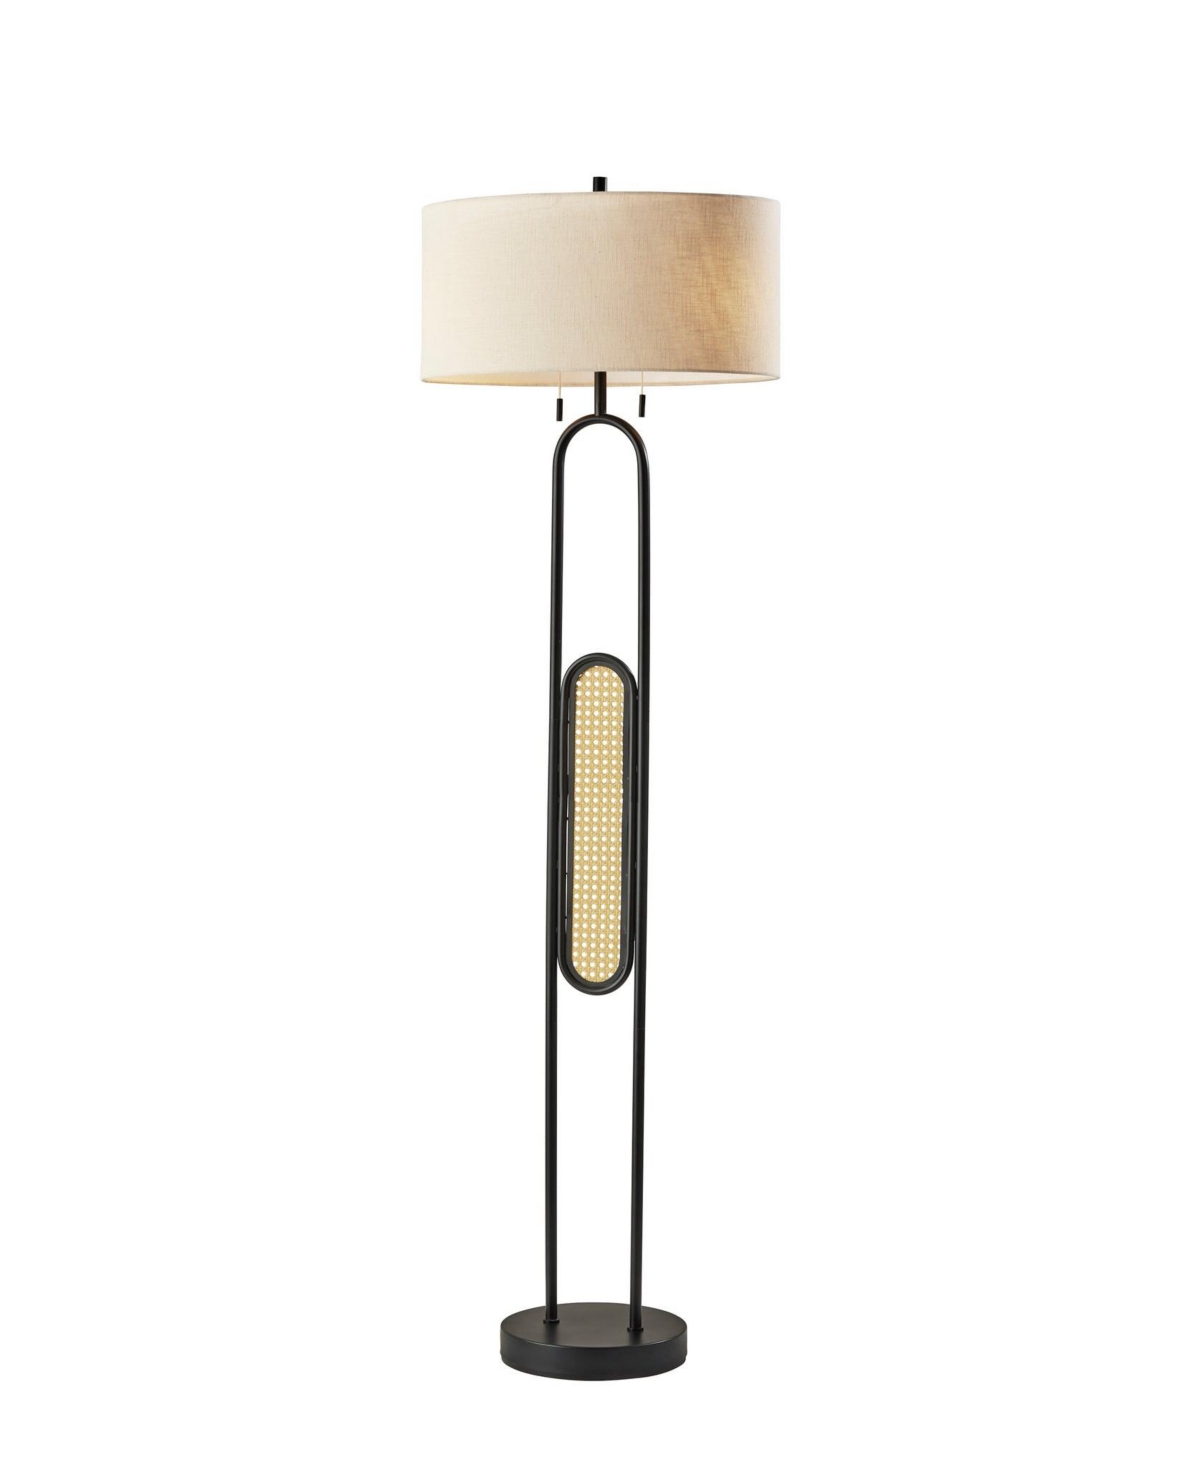 Adesso Levy Floor Lamp In Black With Webbed Caning Material